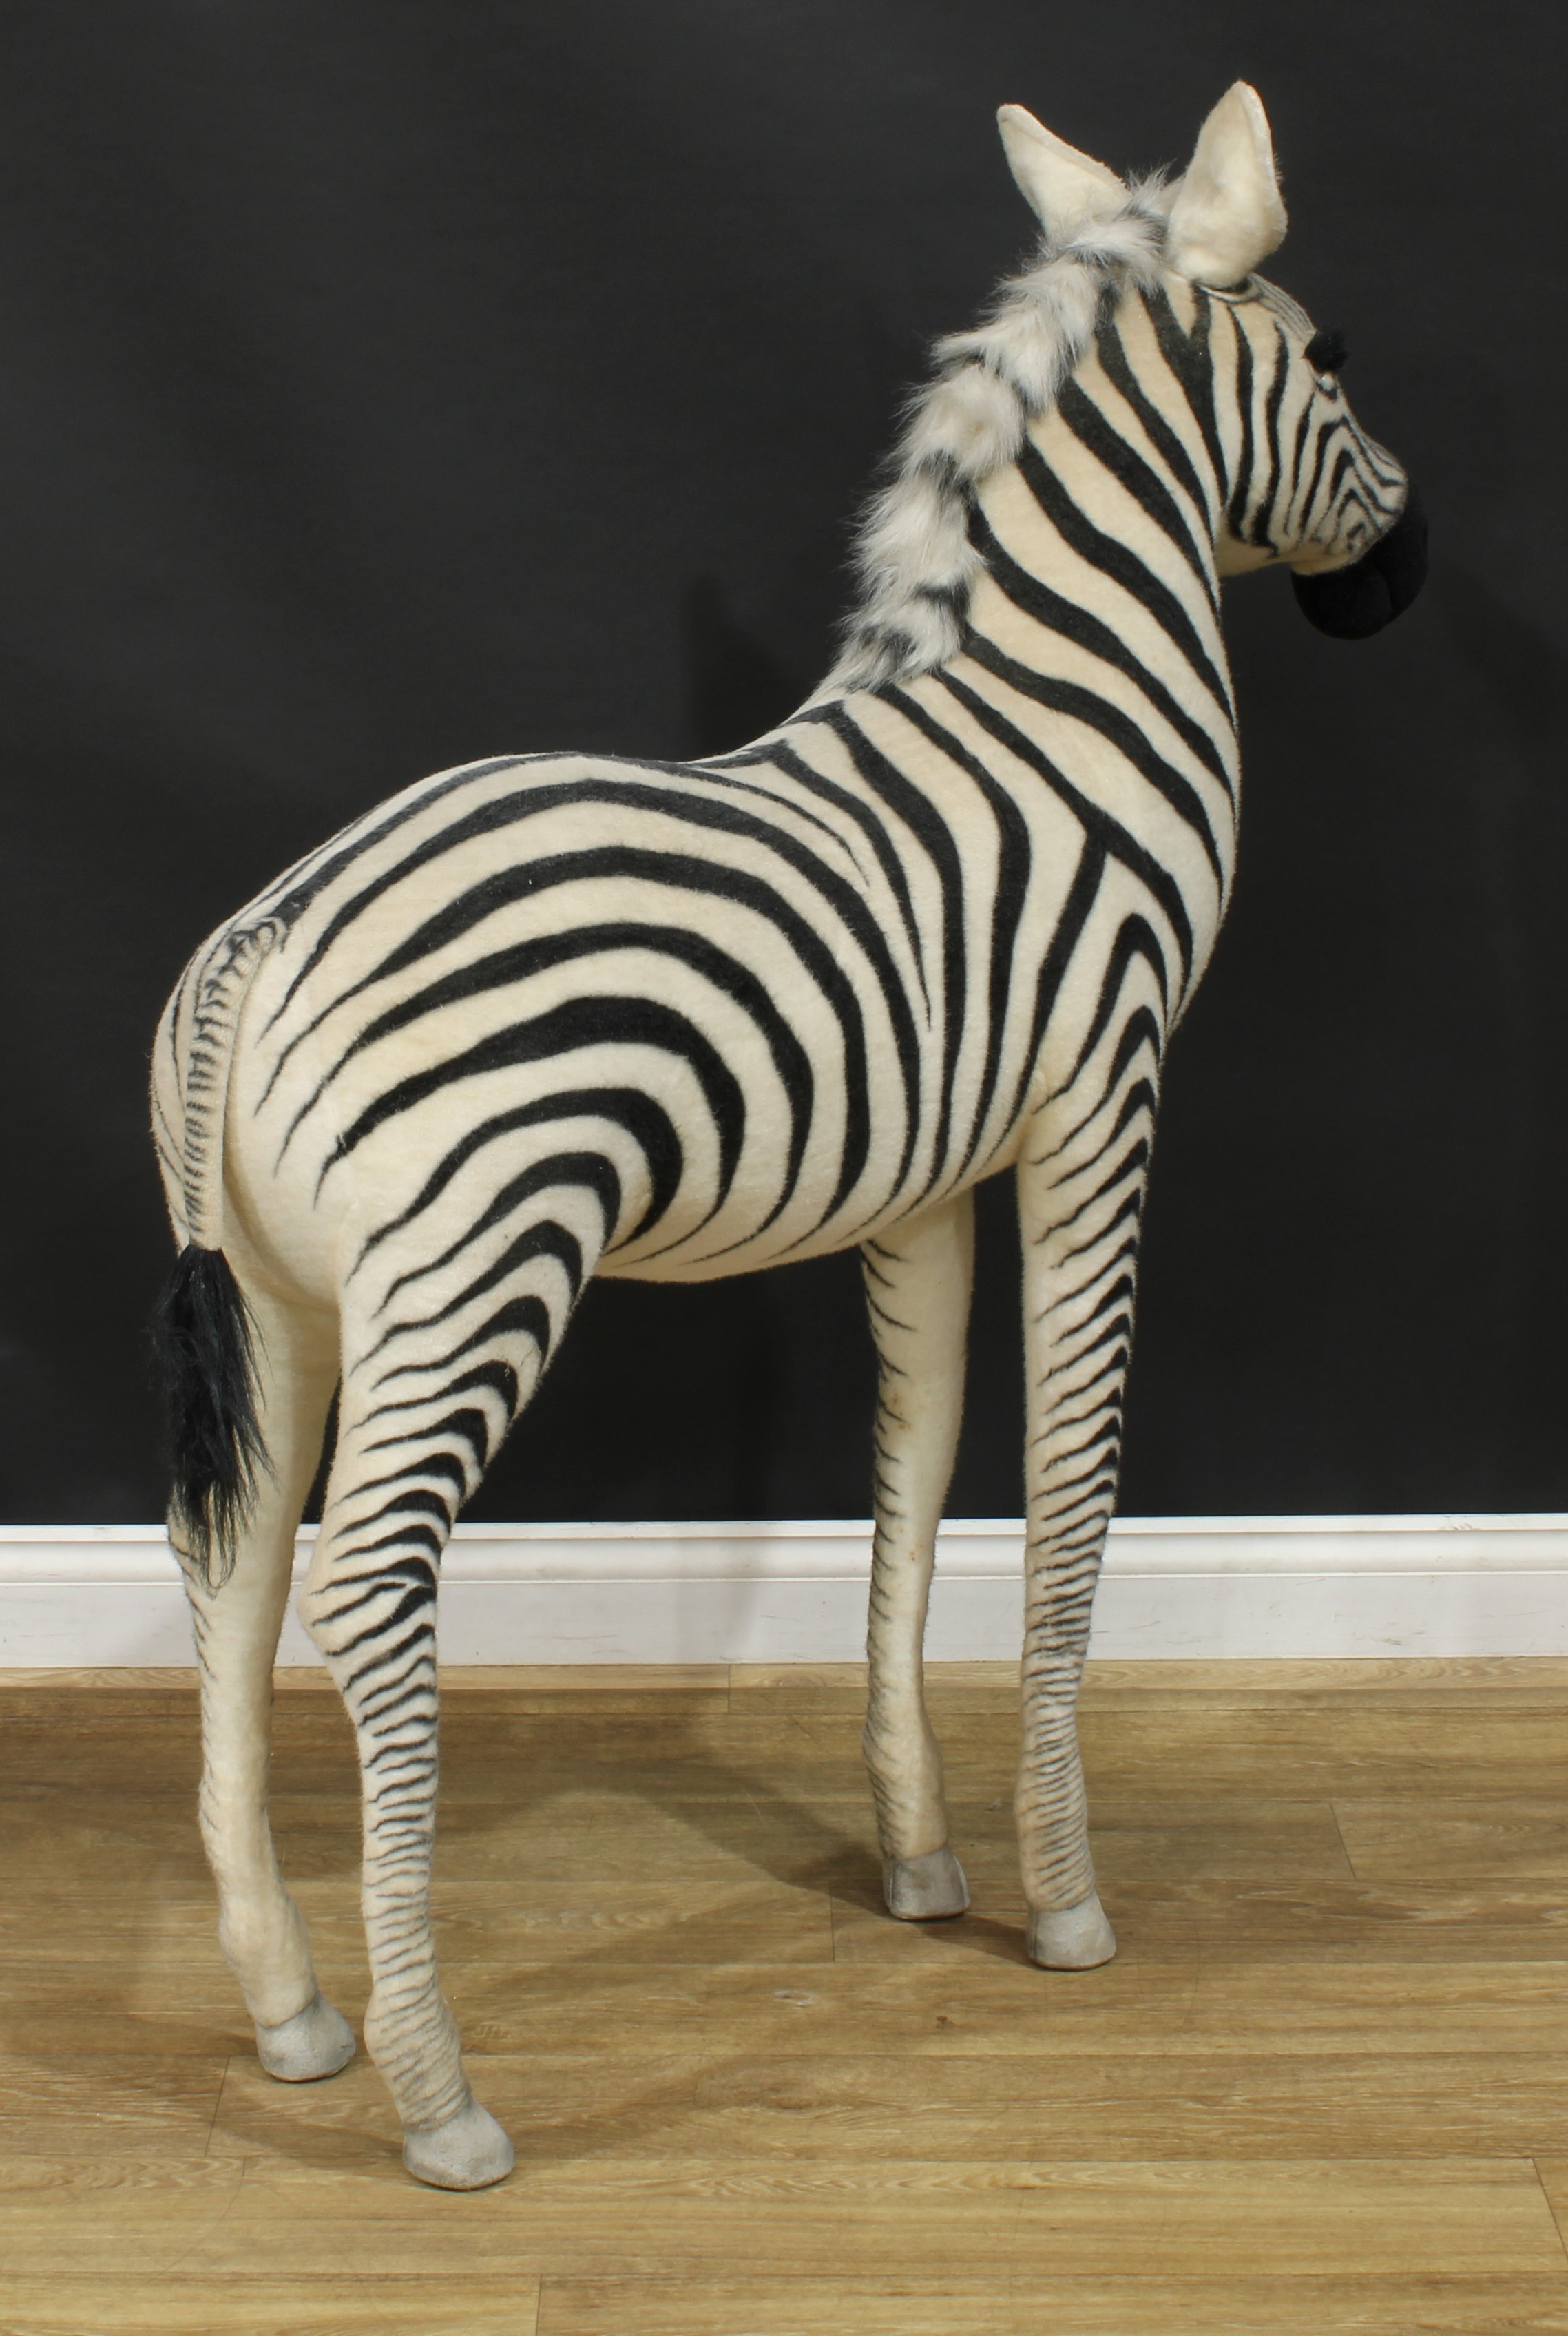 A large shop display/point of sale model of a Zebra, probably by Steiff (Germany) or similar, - Image 5 of 5